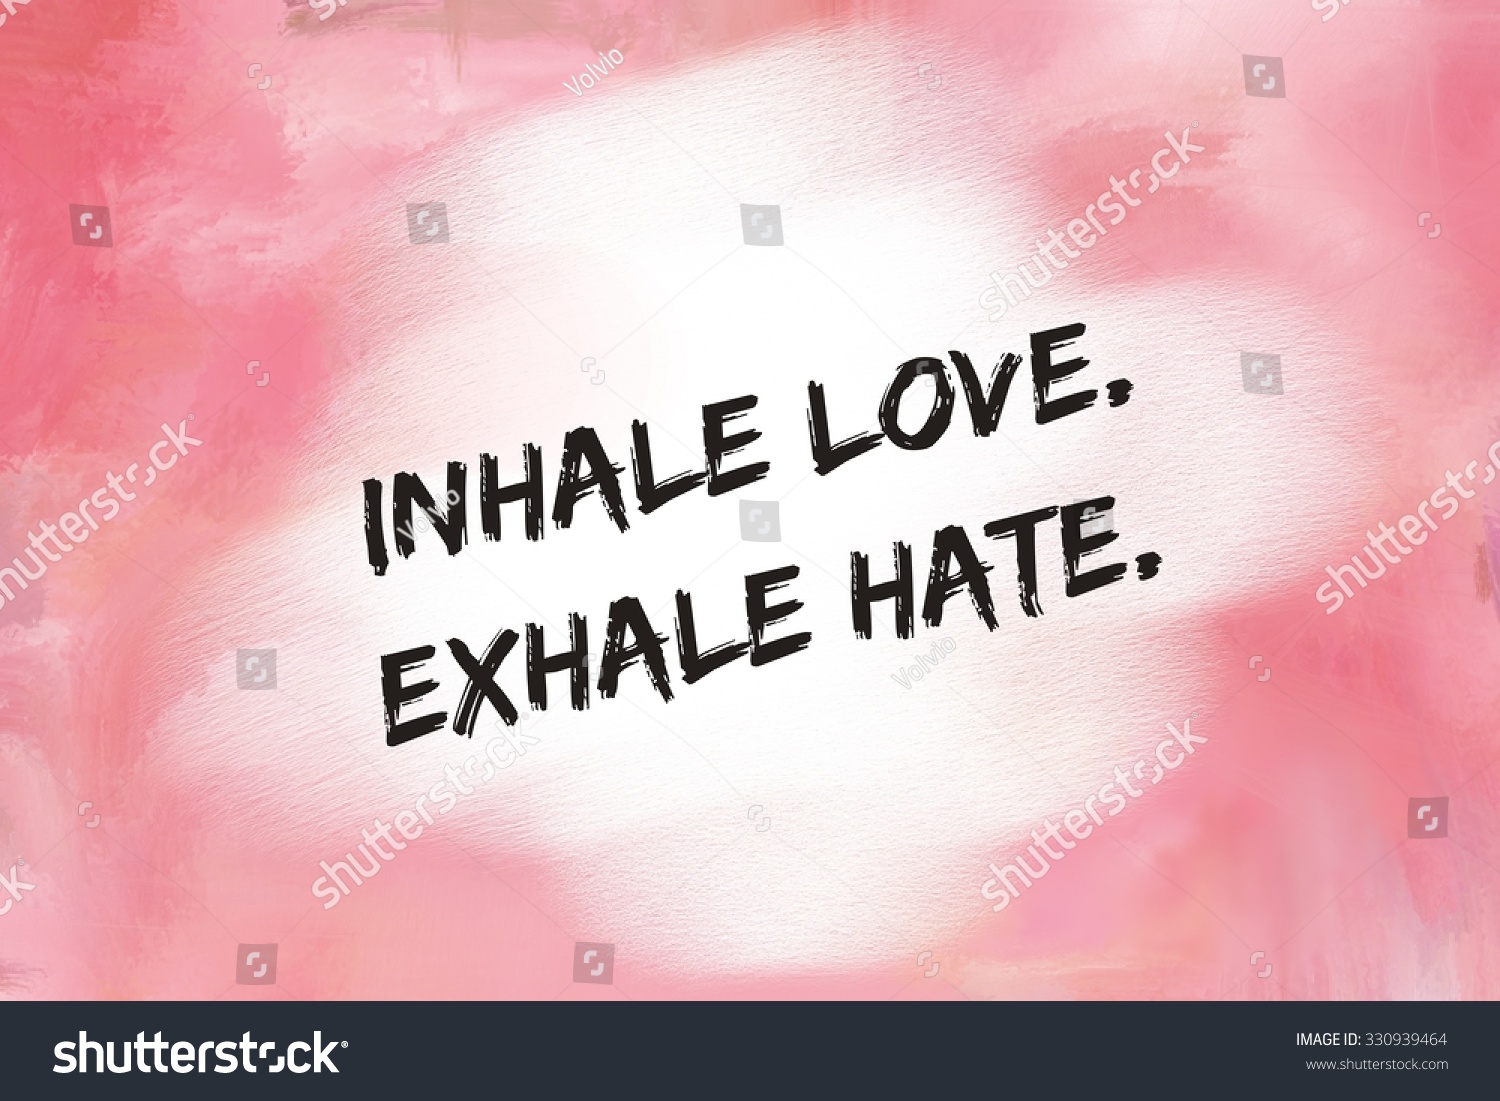 Inhale love exhale hate message over pink painted background